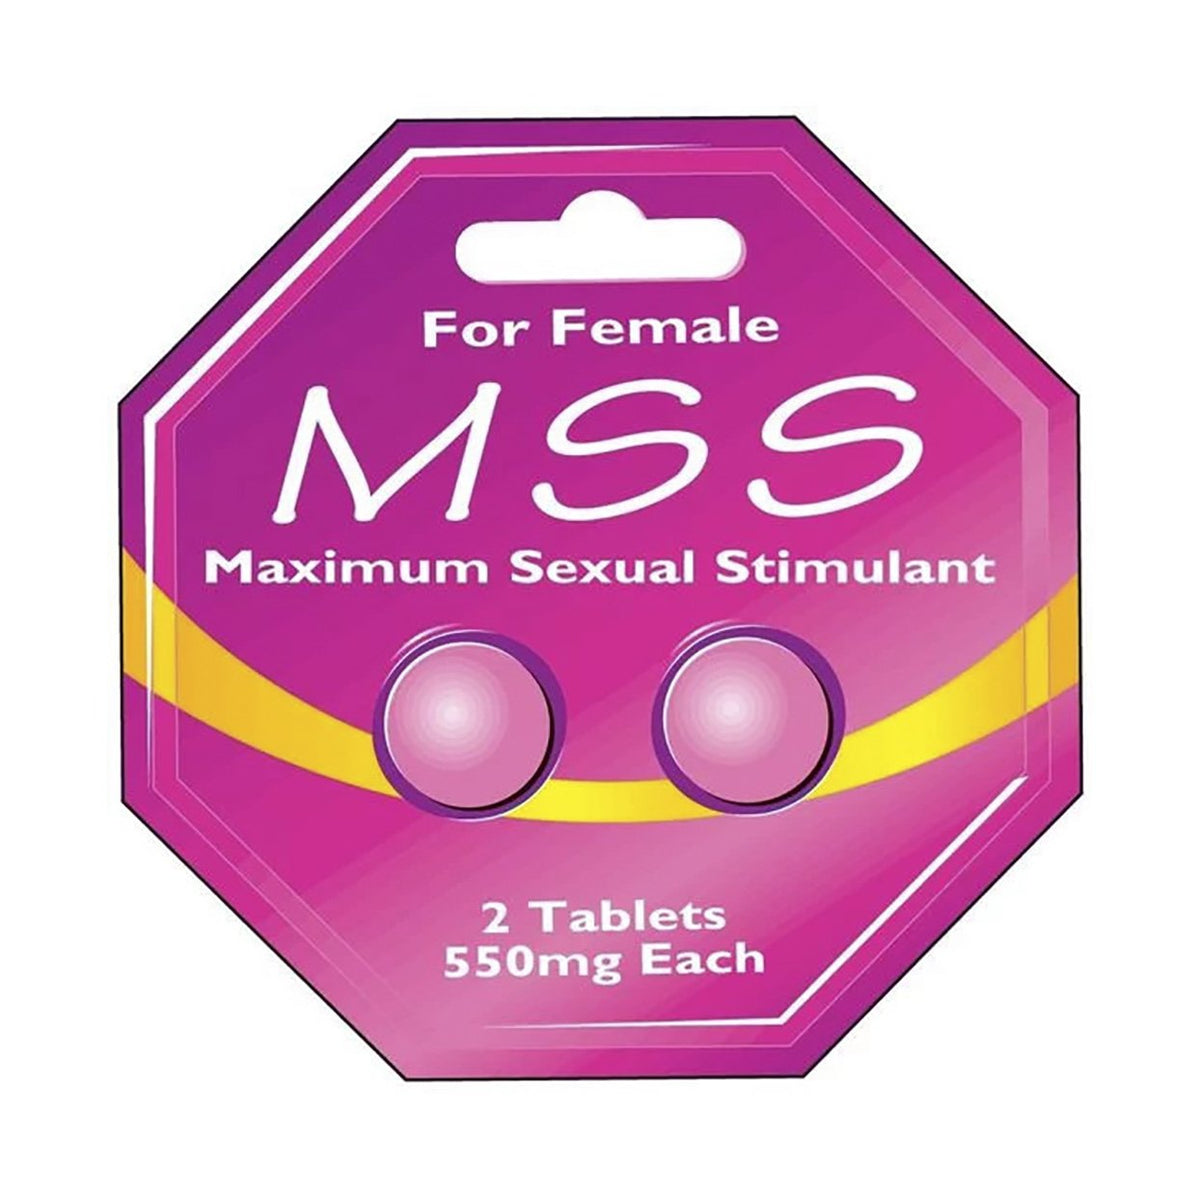 Maximum Sexual Stimulant For Female 550mg 2 Tablets Med365 